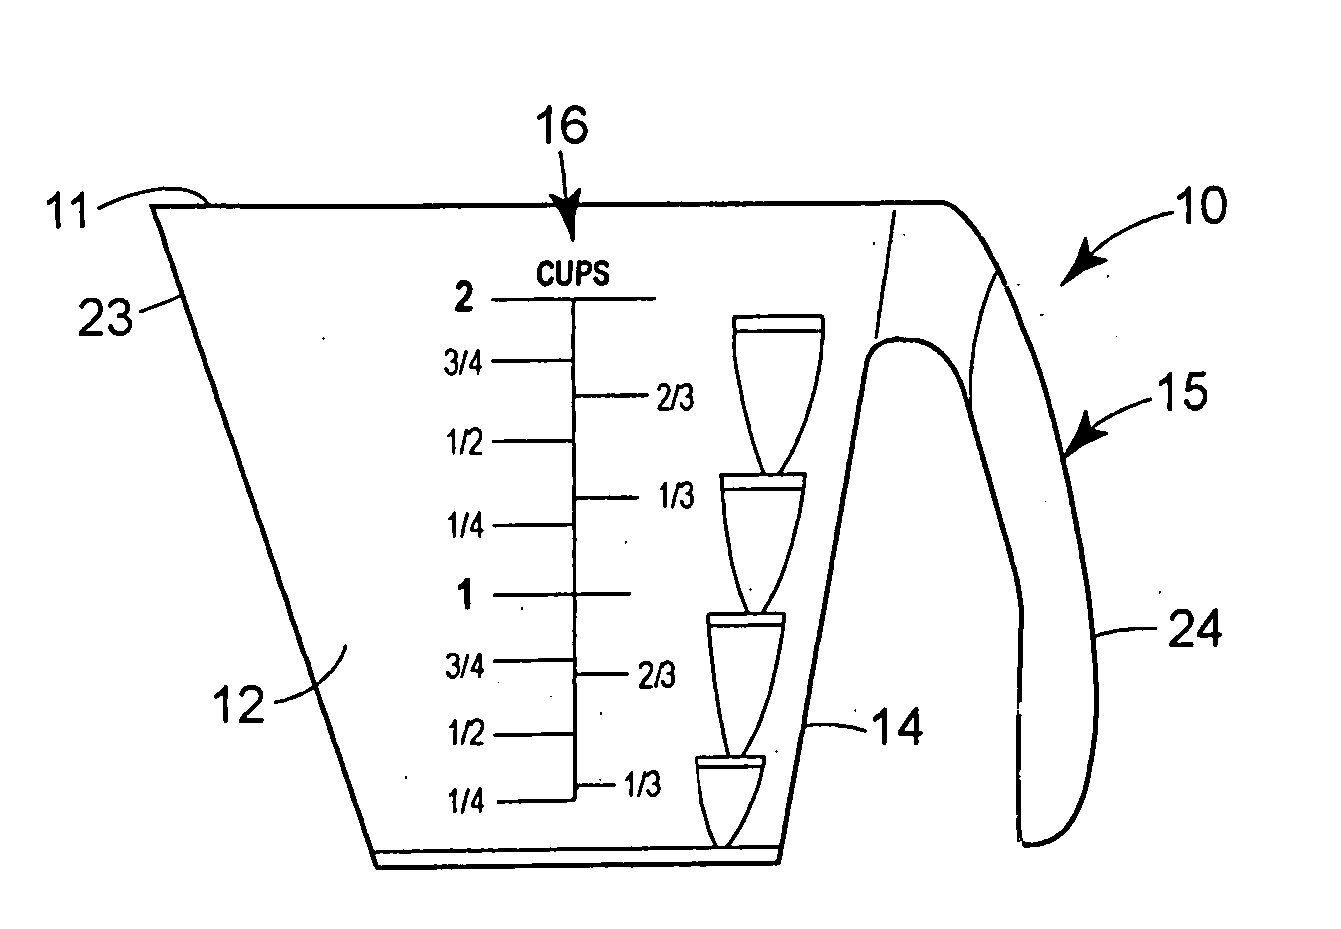 Measuring cup with volume markings visible while pouring